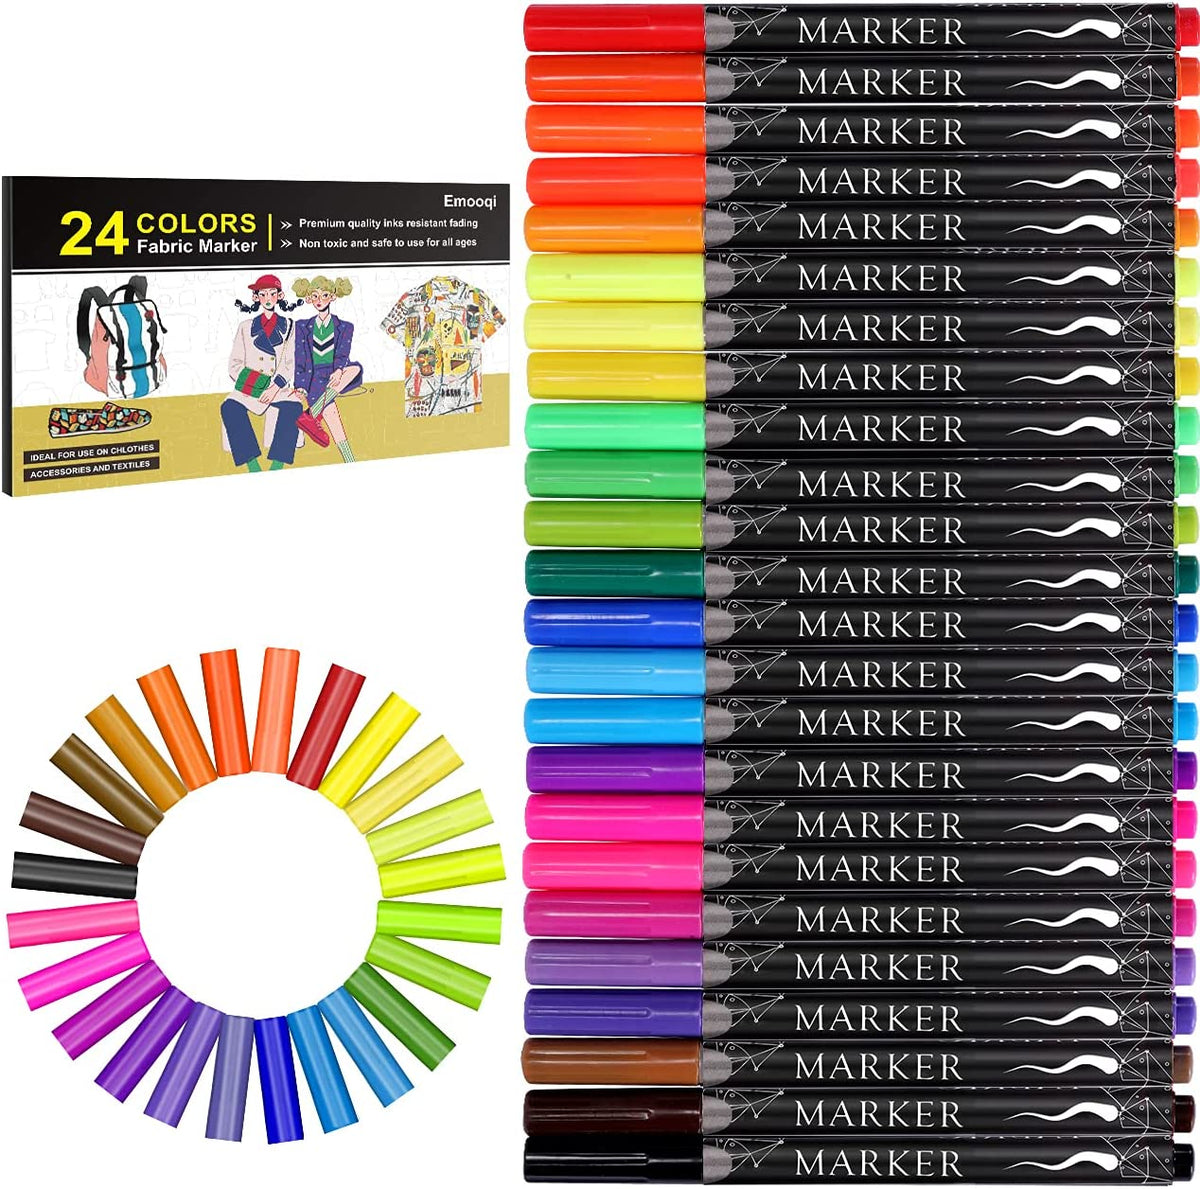 Emooqi Fabric Markers Pen, 24 Colors Fabric Paint Art Marker Set  Double-Ended Fabric Markers with Chisel Point and Fine Point Tips, Child  Safe 